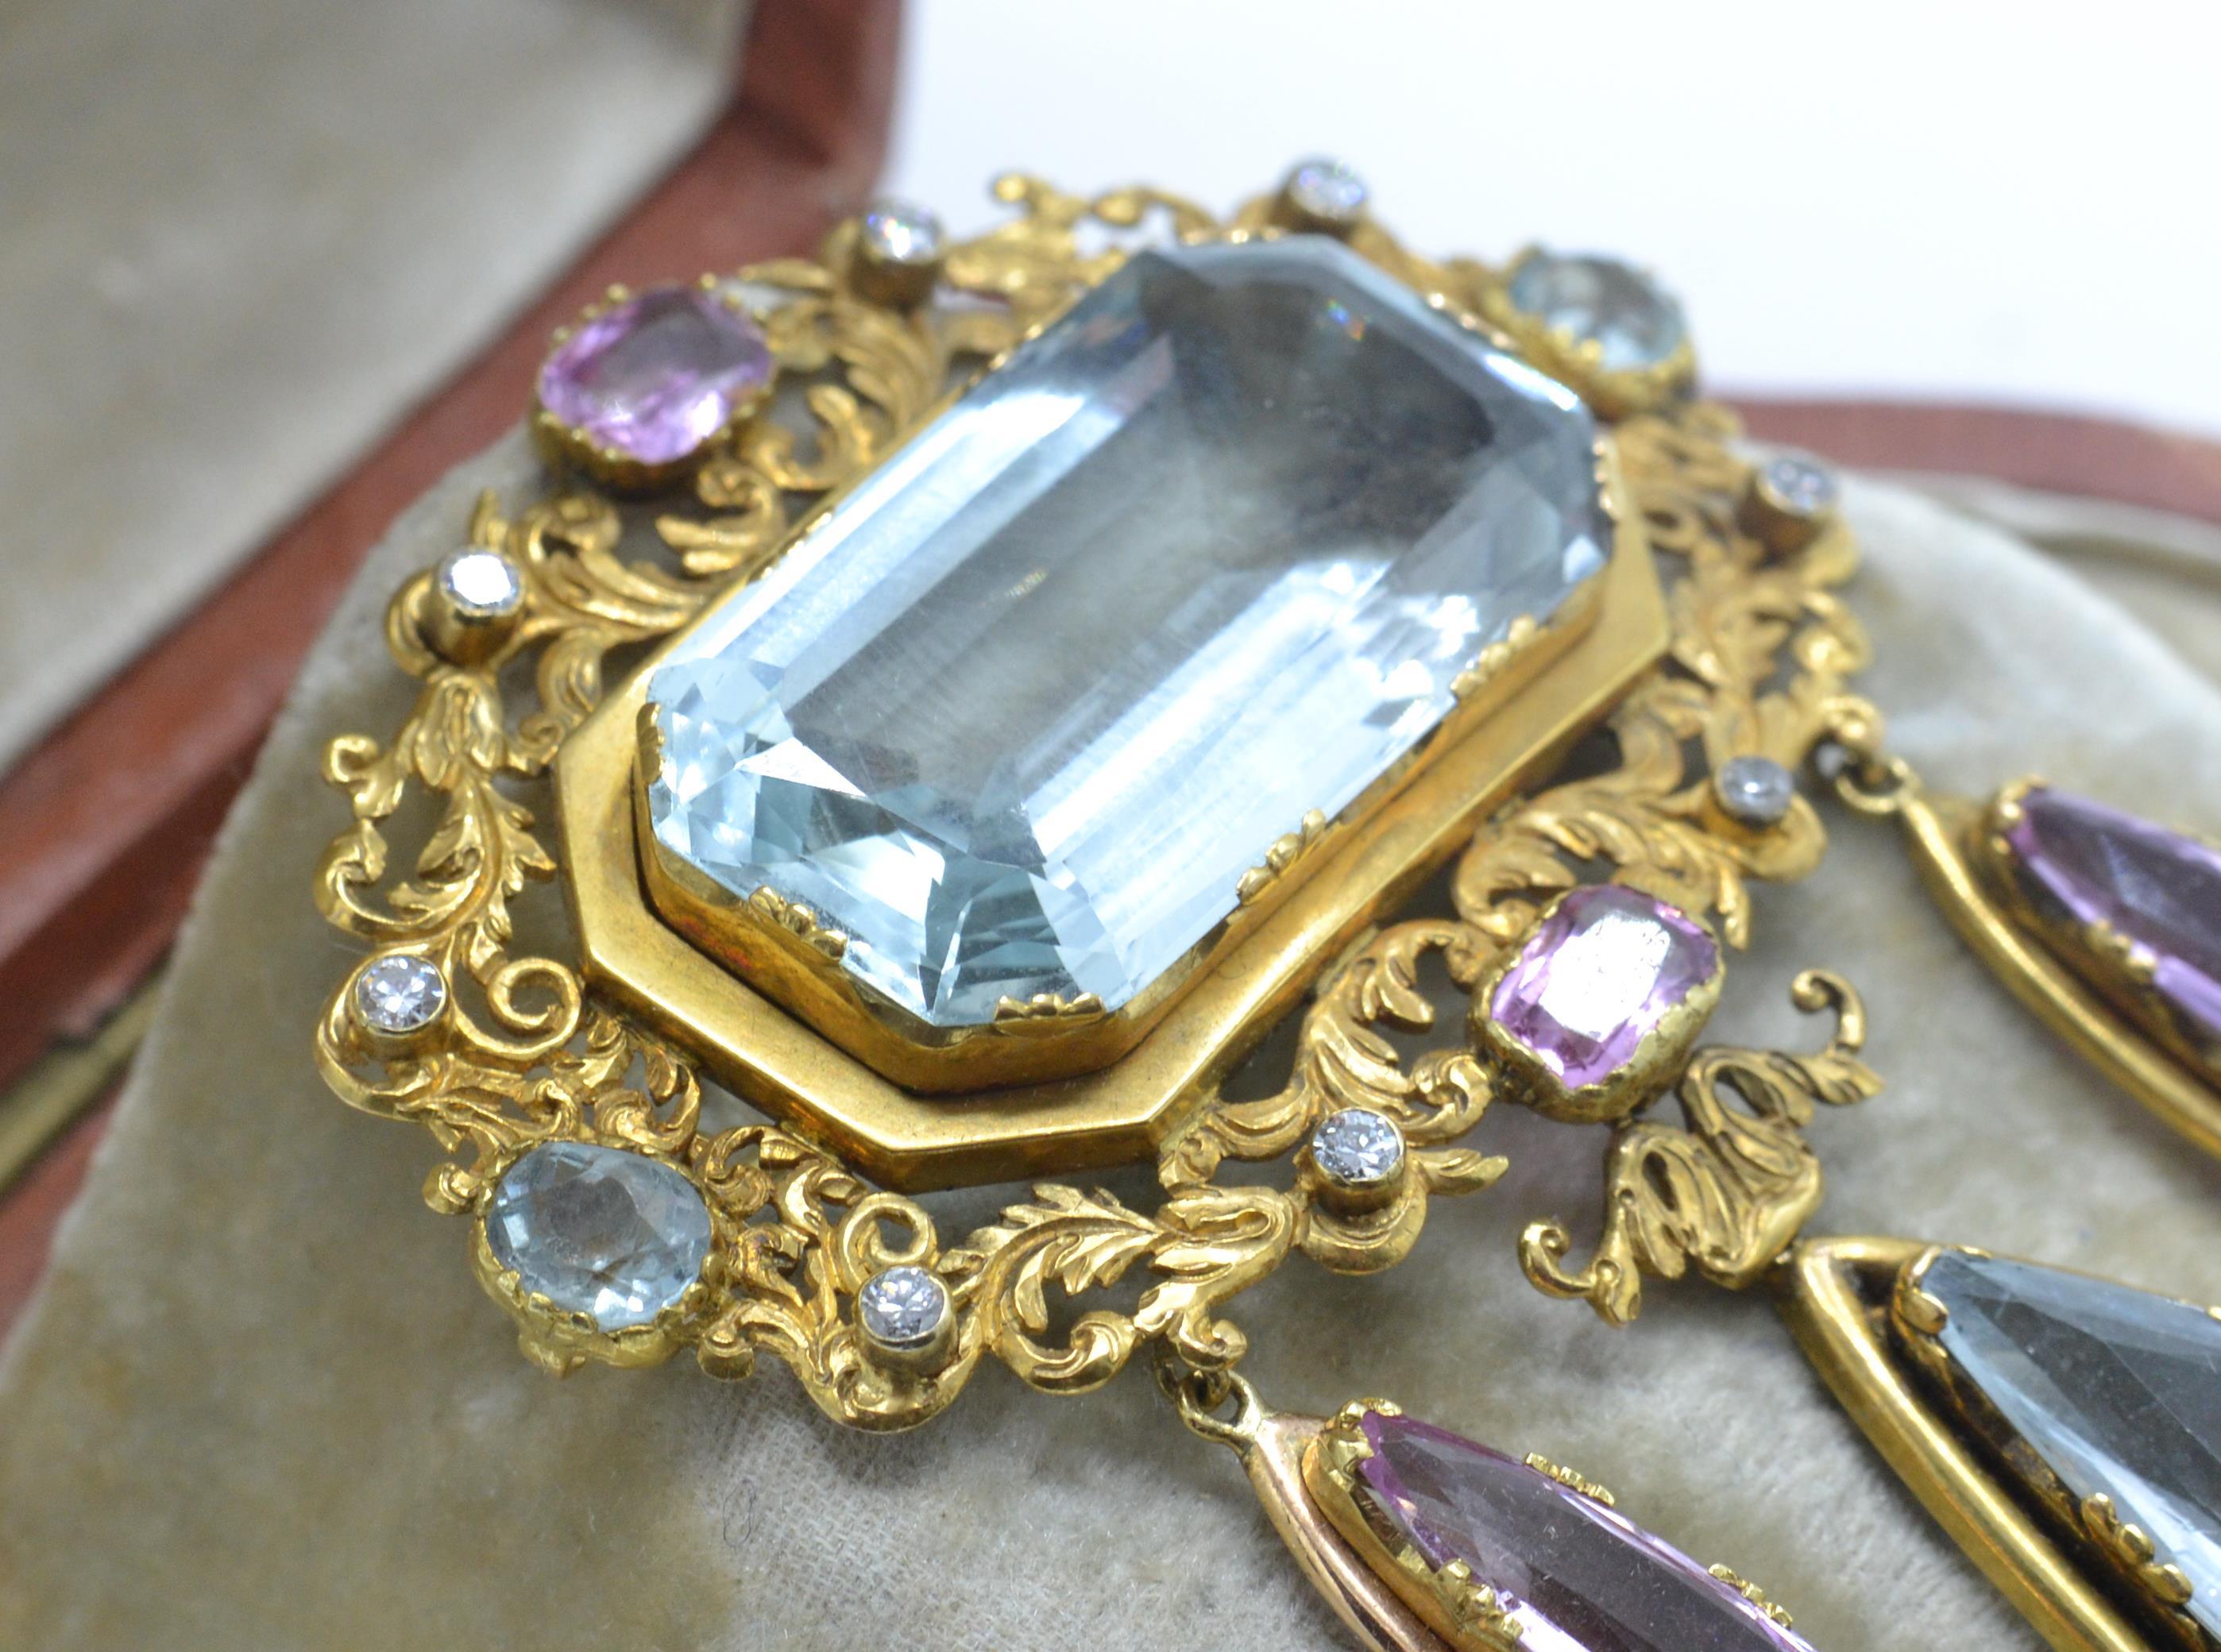 A cased 19th century gold, aquamarine, pink topaz and diamond brooch and earring suite. - Image 2 of 9